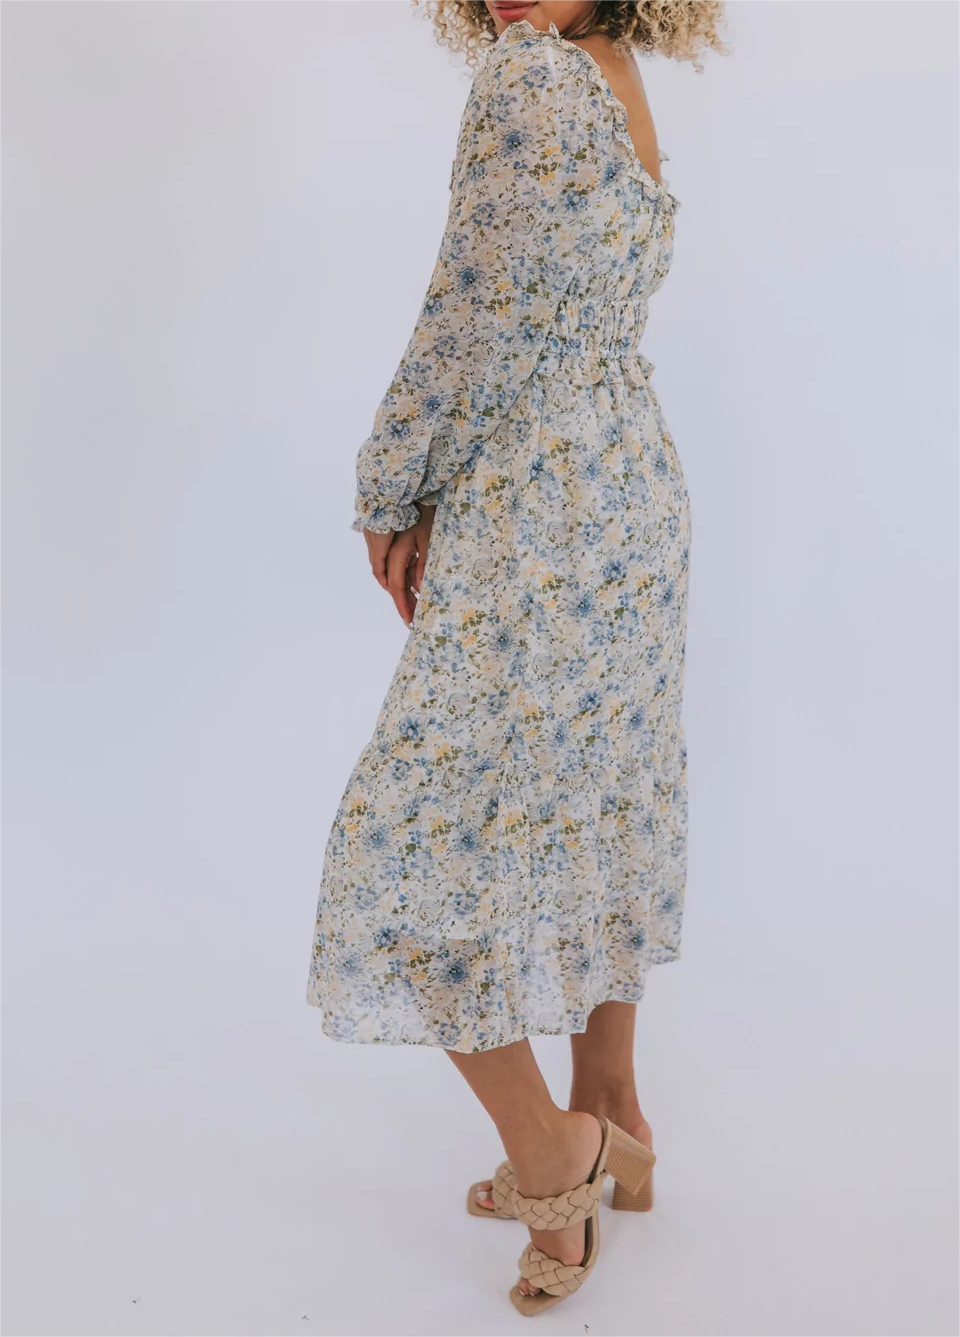 Early Spring Women Clothing Elastic Waist Square Collar Wild Blue Floral Dress